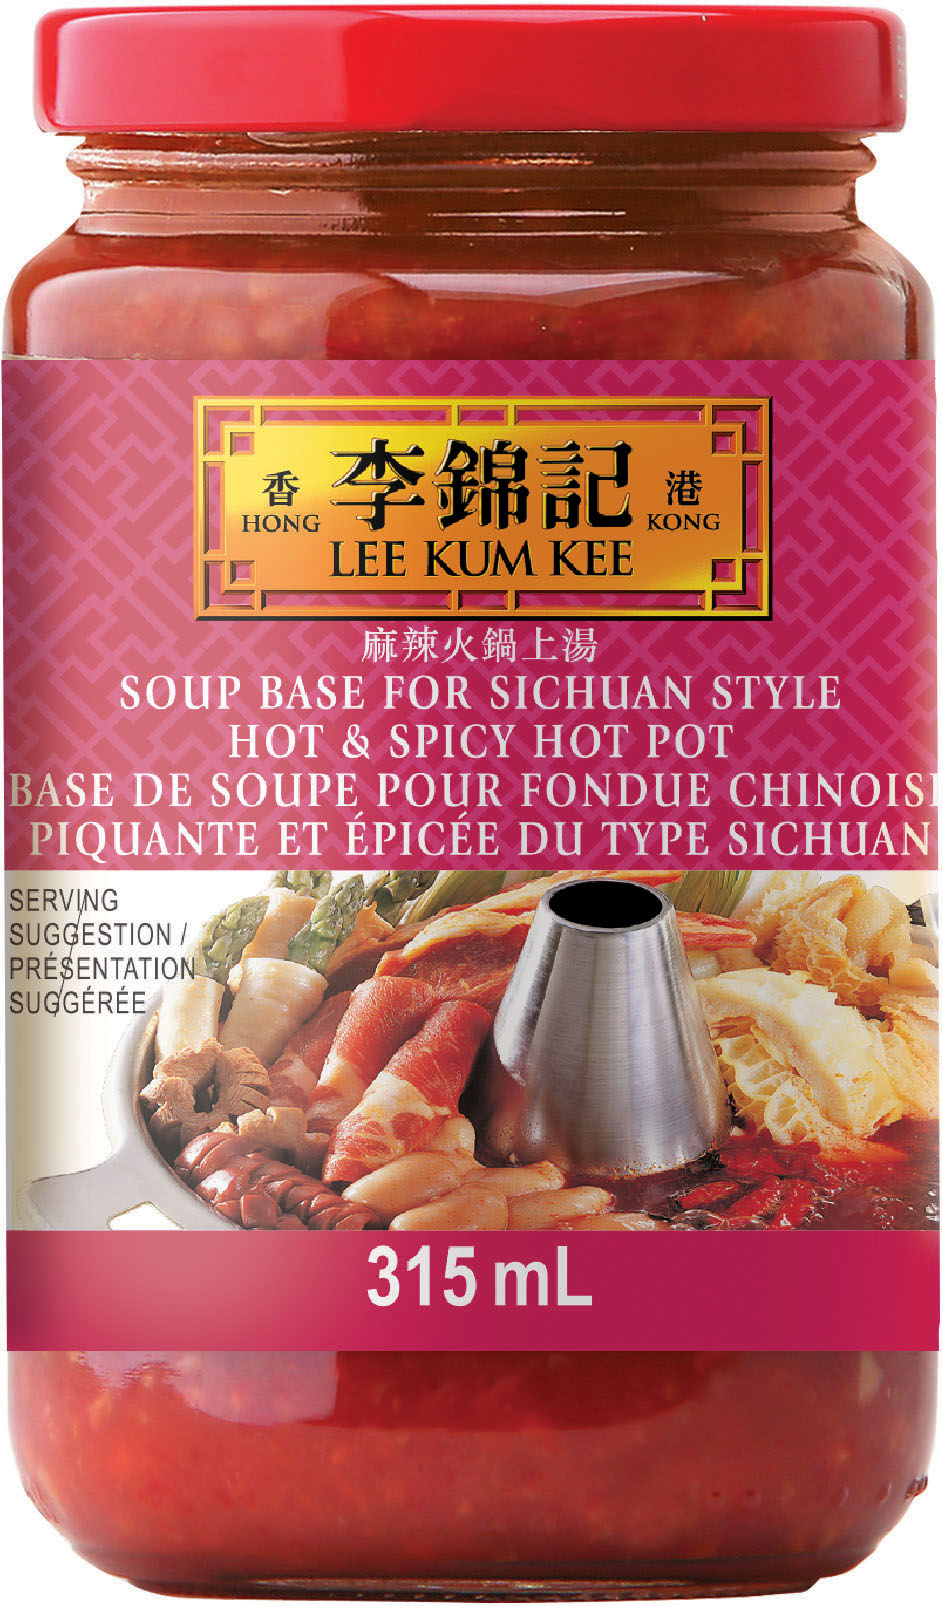 Soup Base for Sichuan Style Hot & Spicy Hot Pot 315 mL, Jar